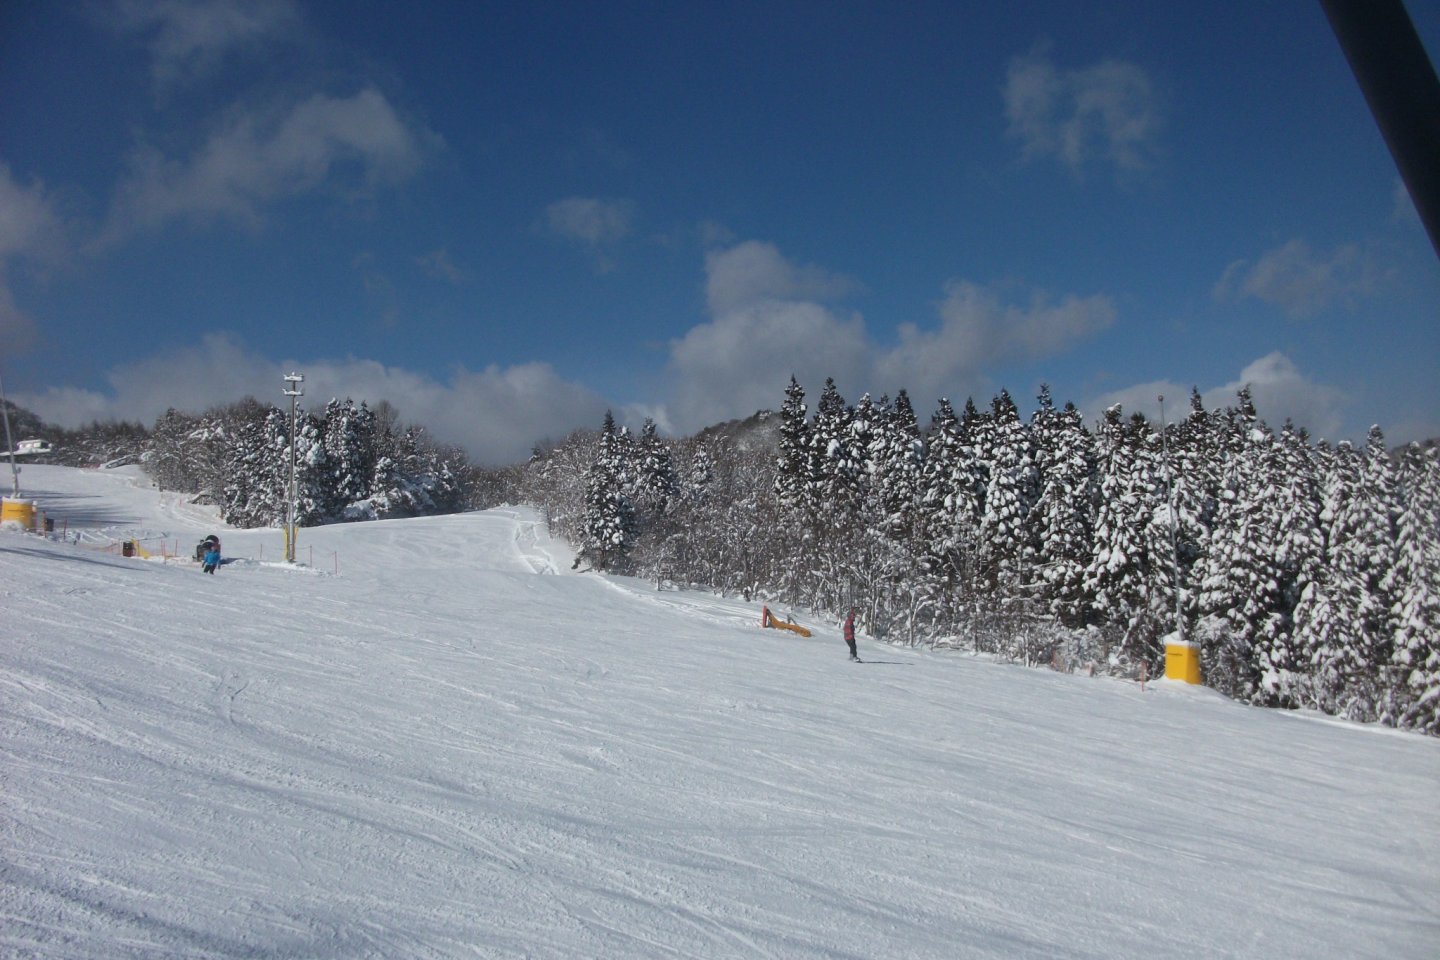 One of the runs at Spring Valley.